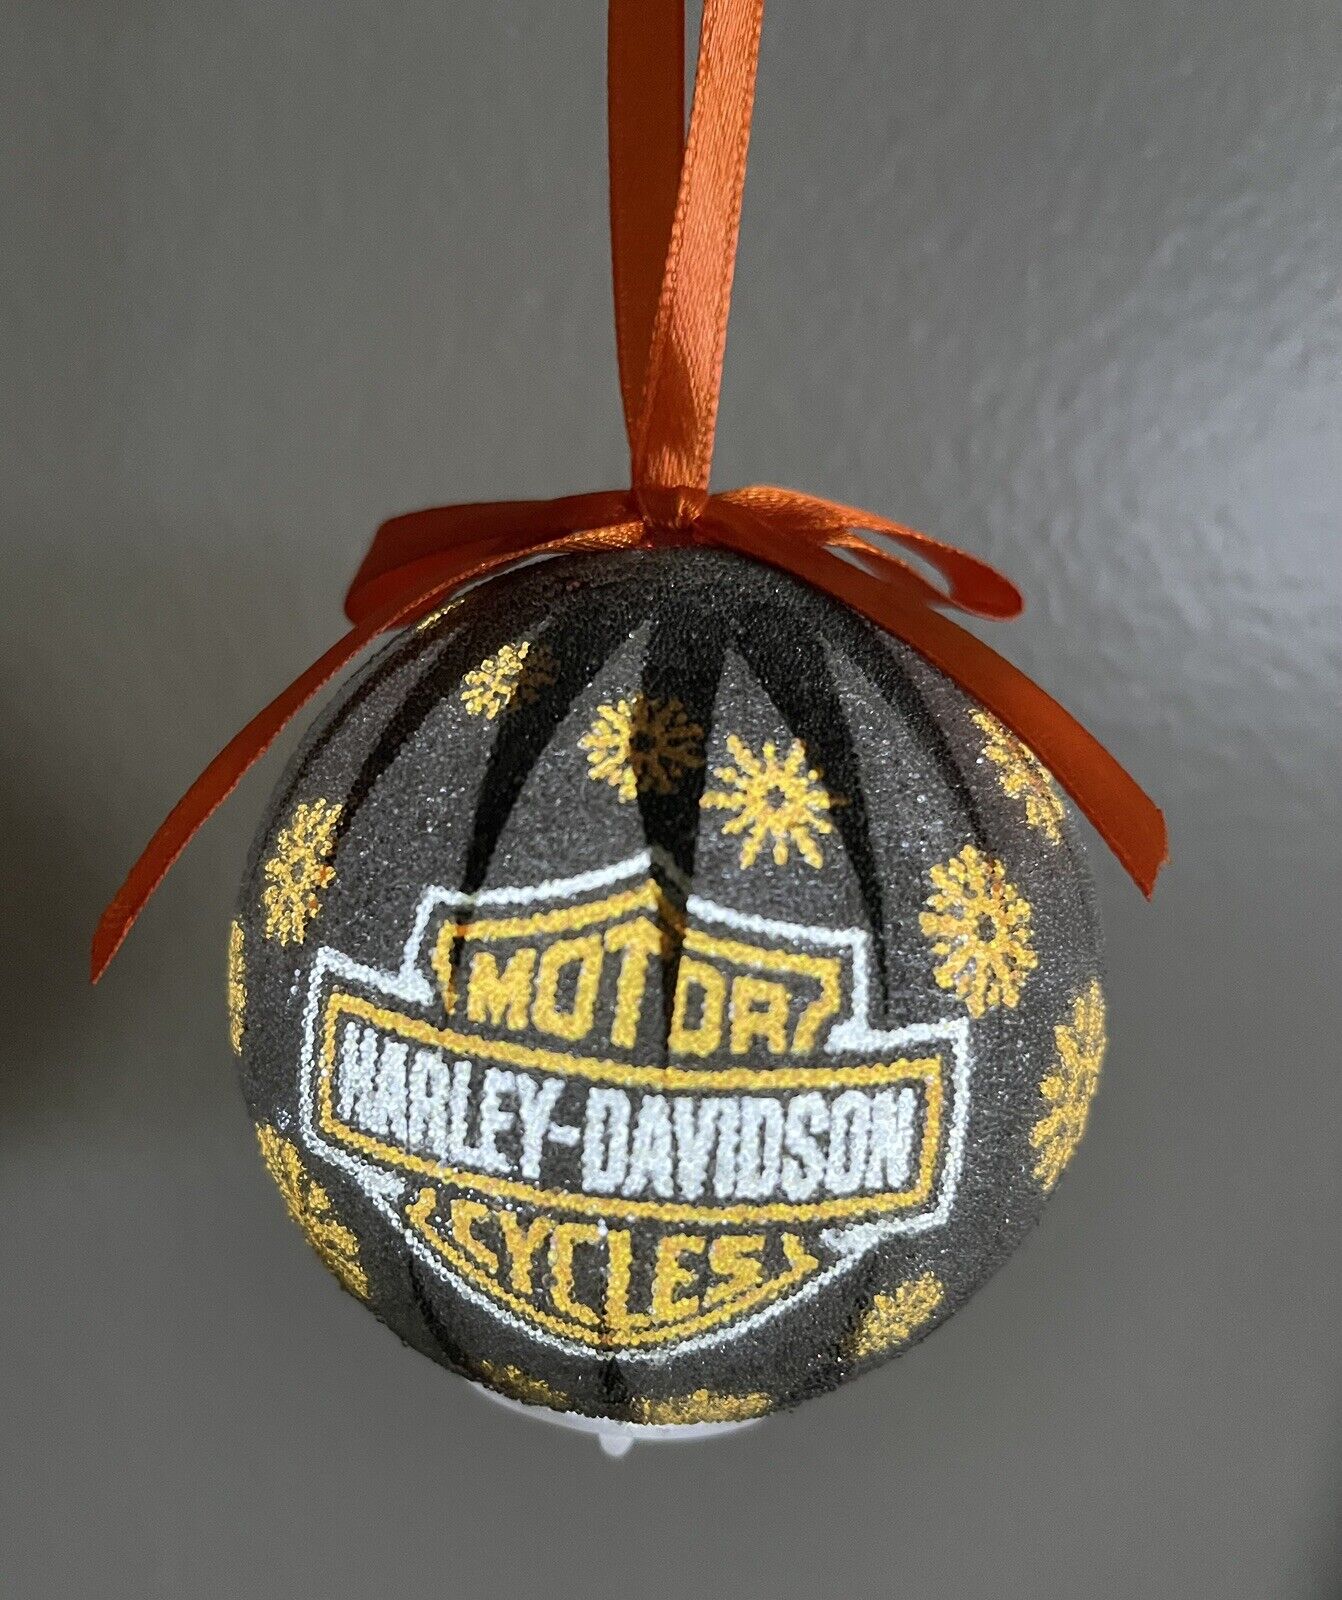 NEW Harley Davidson Motorcycles LED Light Up 3” Round Christmas Ornament Beaded